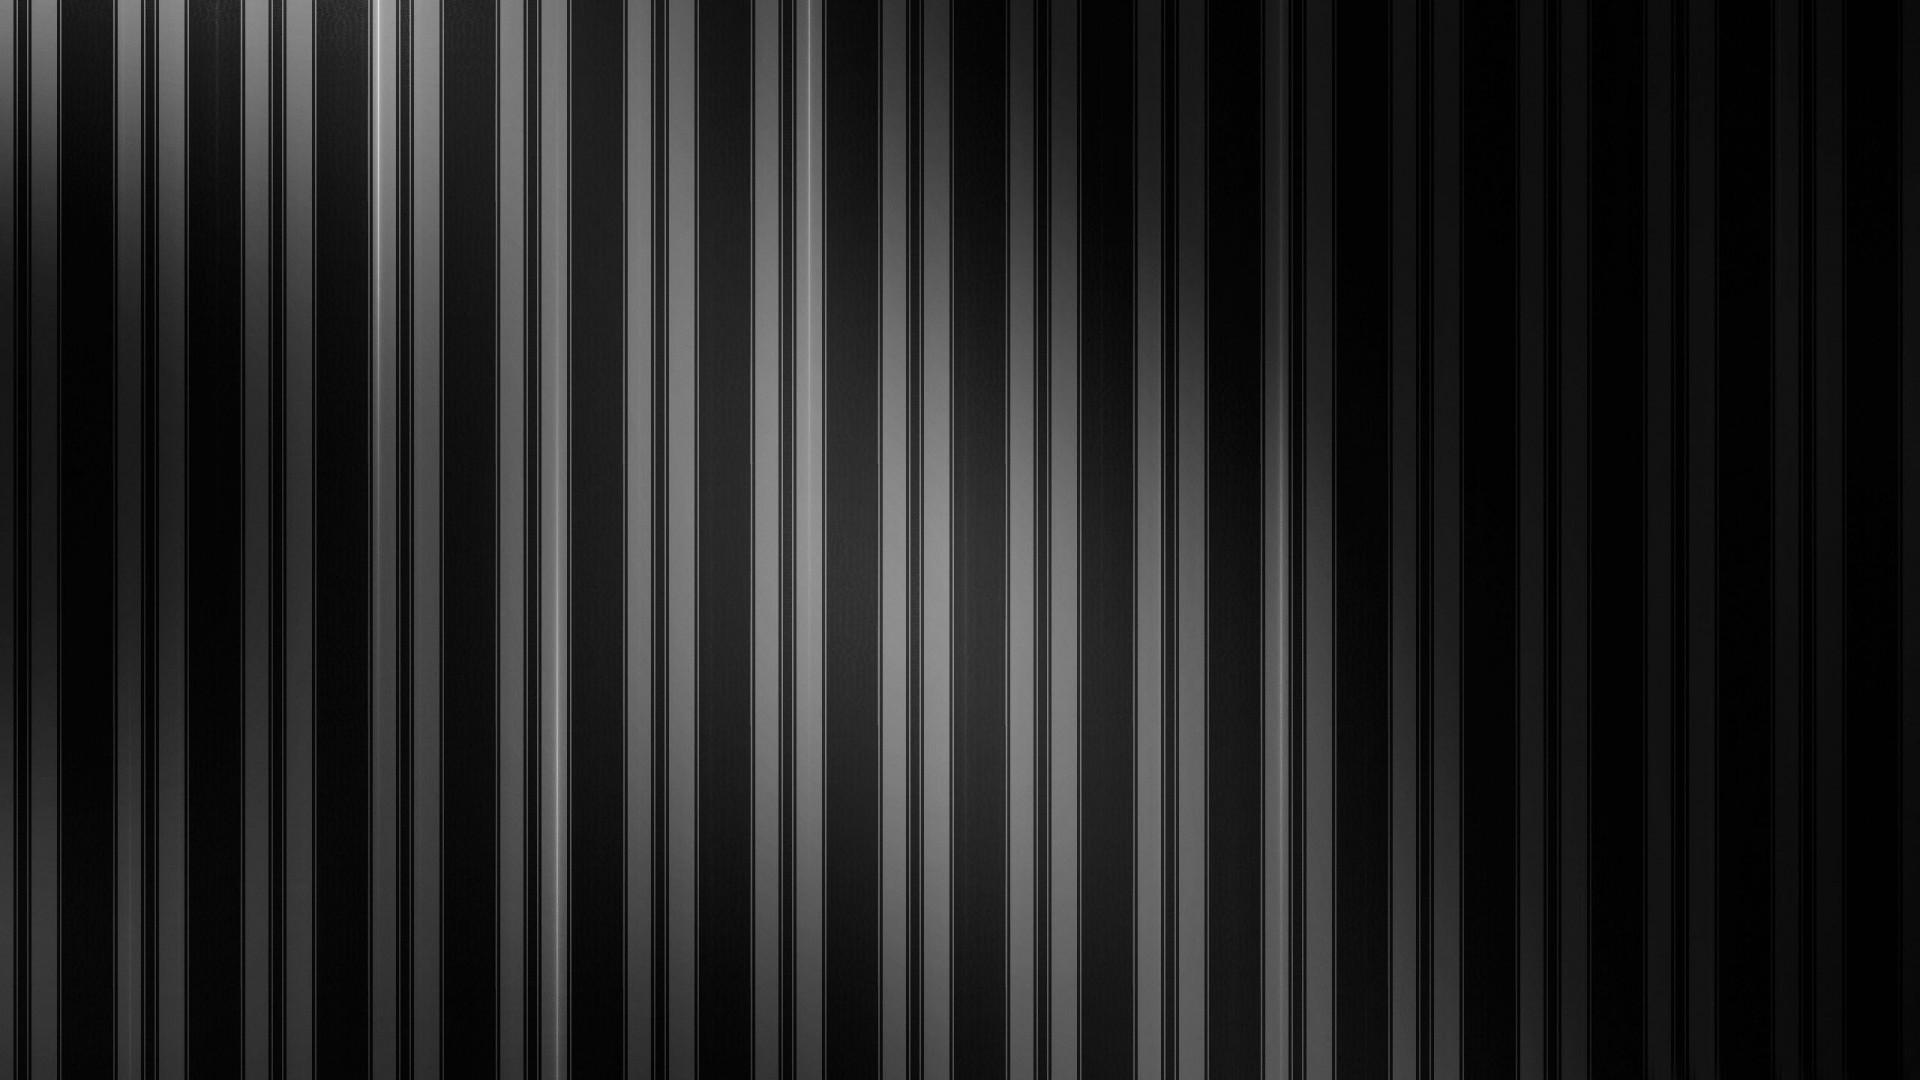 Free download Cool Black And White Striped Background Black stripes wallpaper [1920x1080] for your Desktop, Mobile & Tablet. Explore Black and White Striped Wallpaper. Striped Wallpaper for Bathrooms, Black